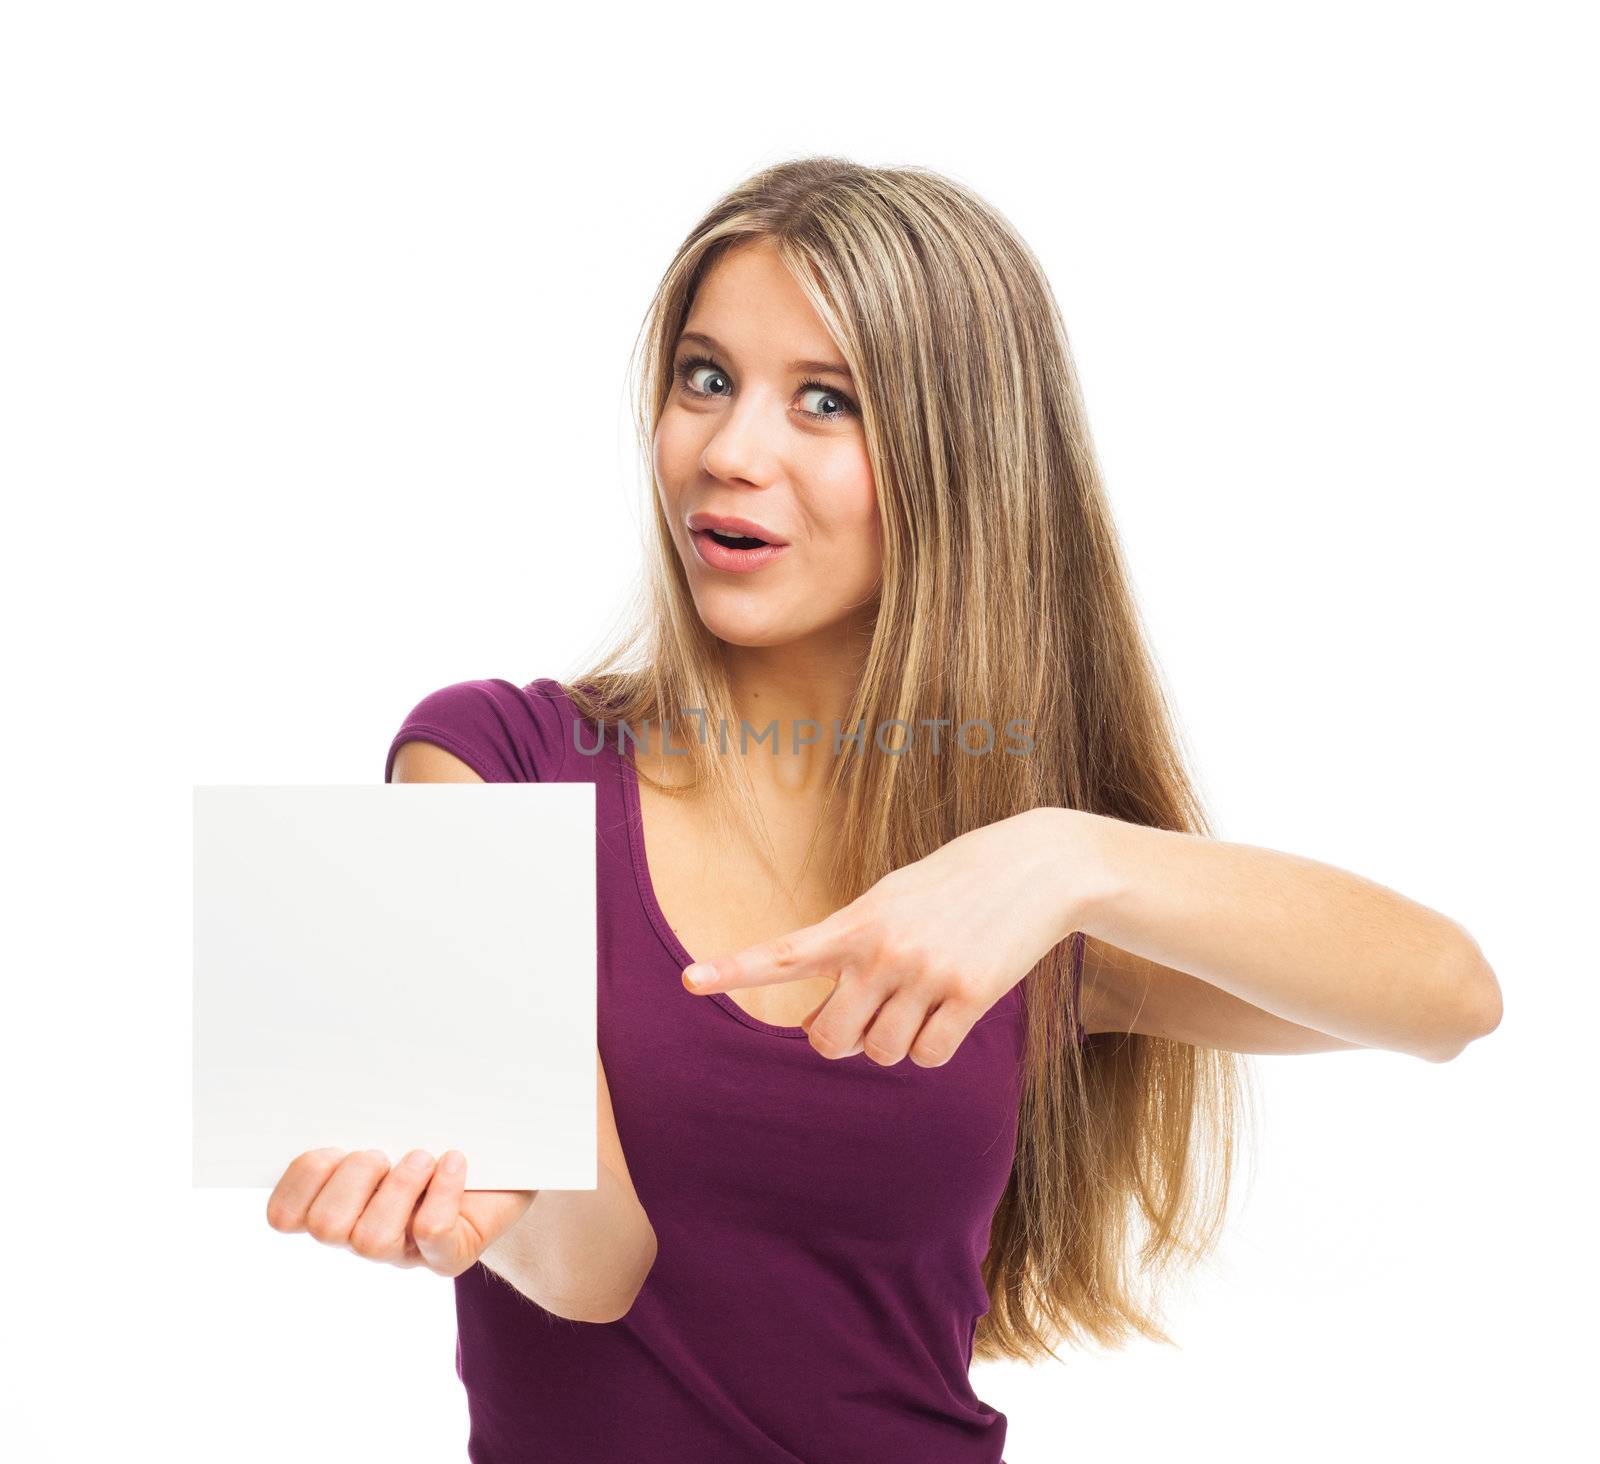 Pretty and cheerful young woman showing a white card, on white